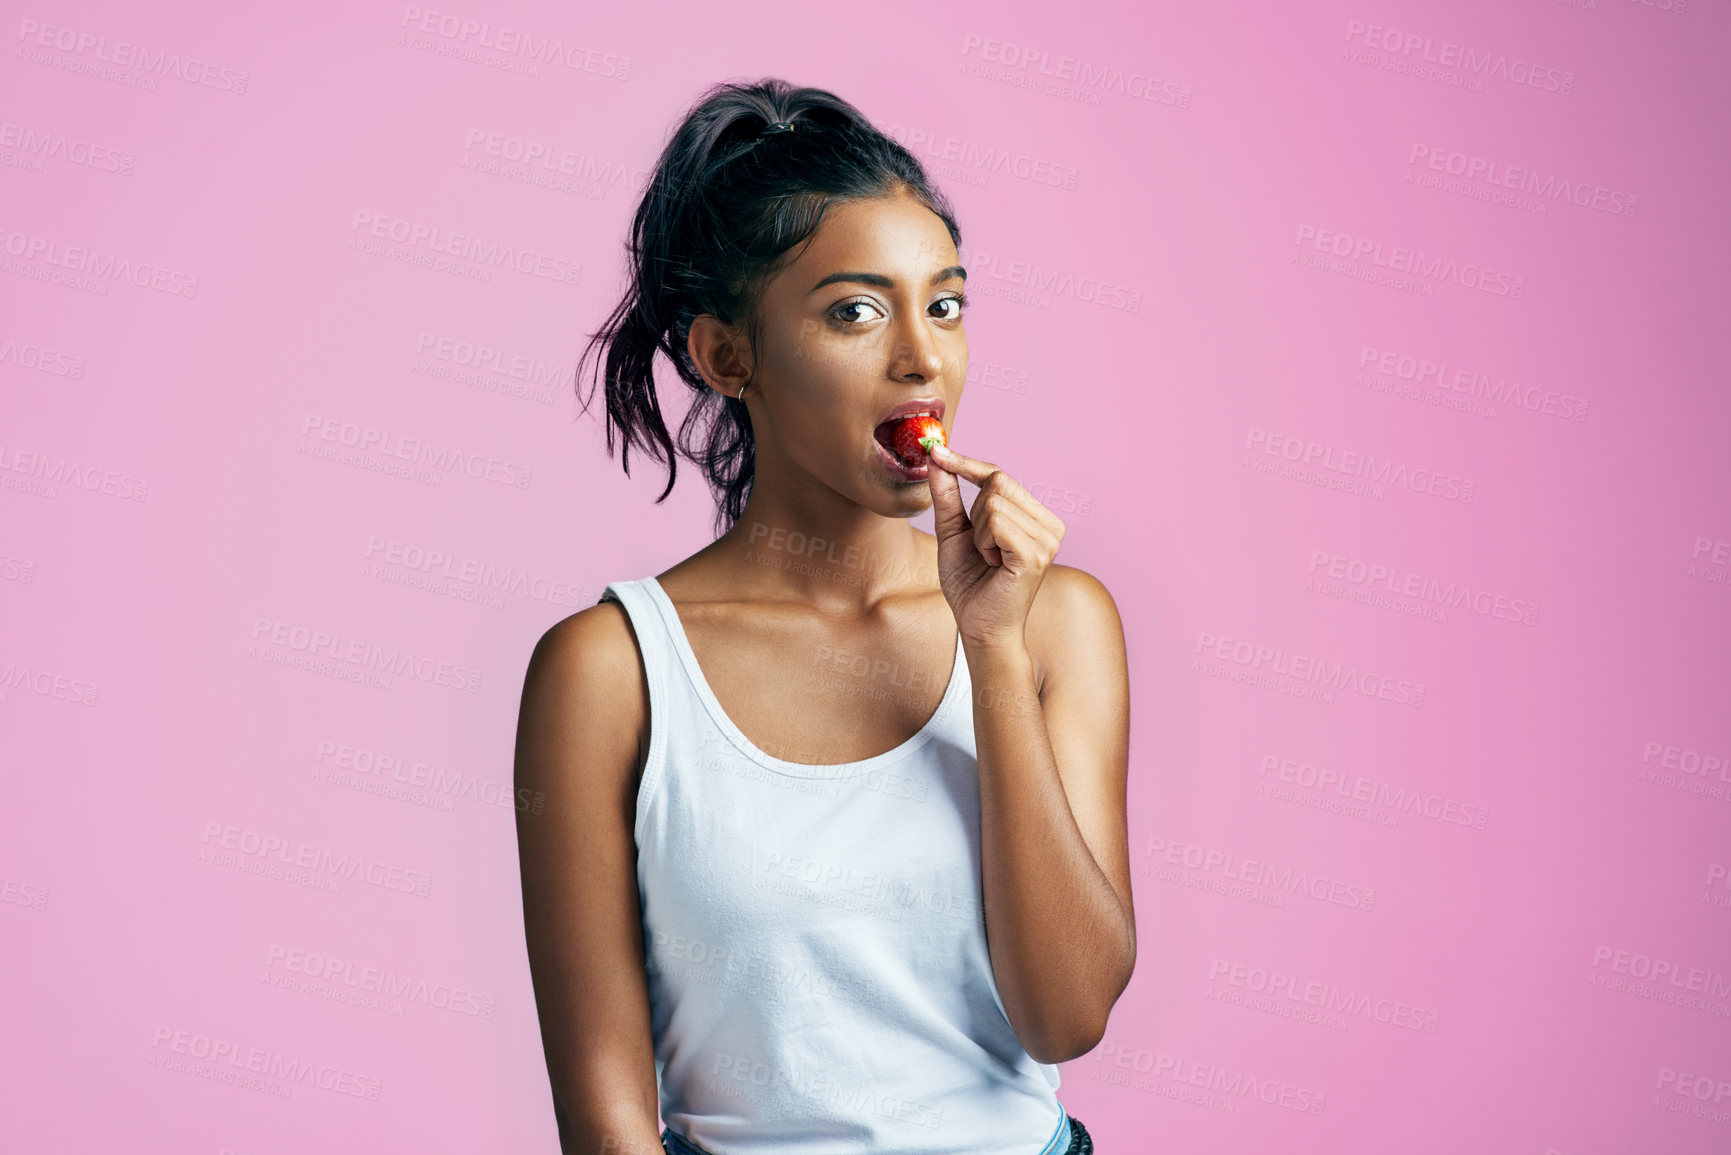 Buy stock photo Studio portrait of a beautiful young woman eating a strawberry against a pink background